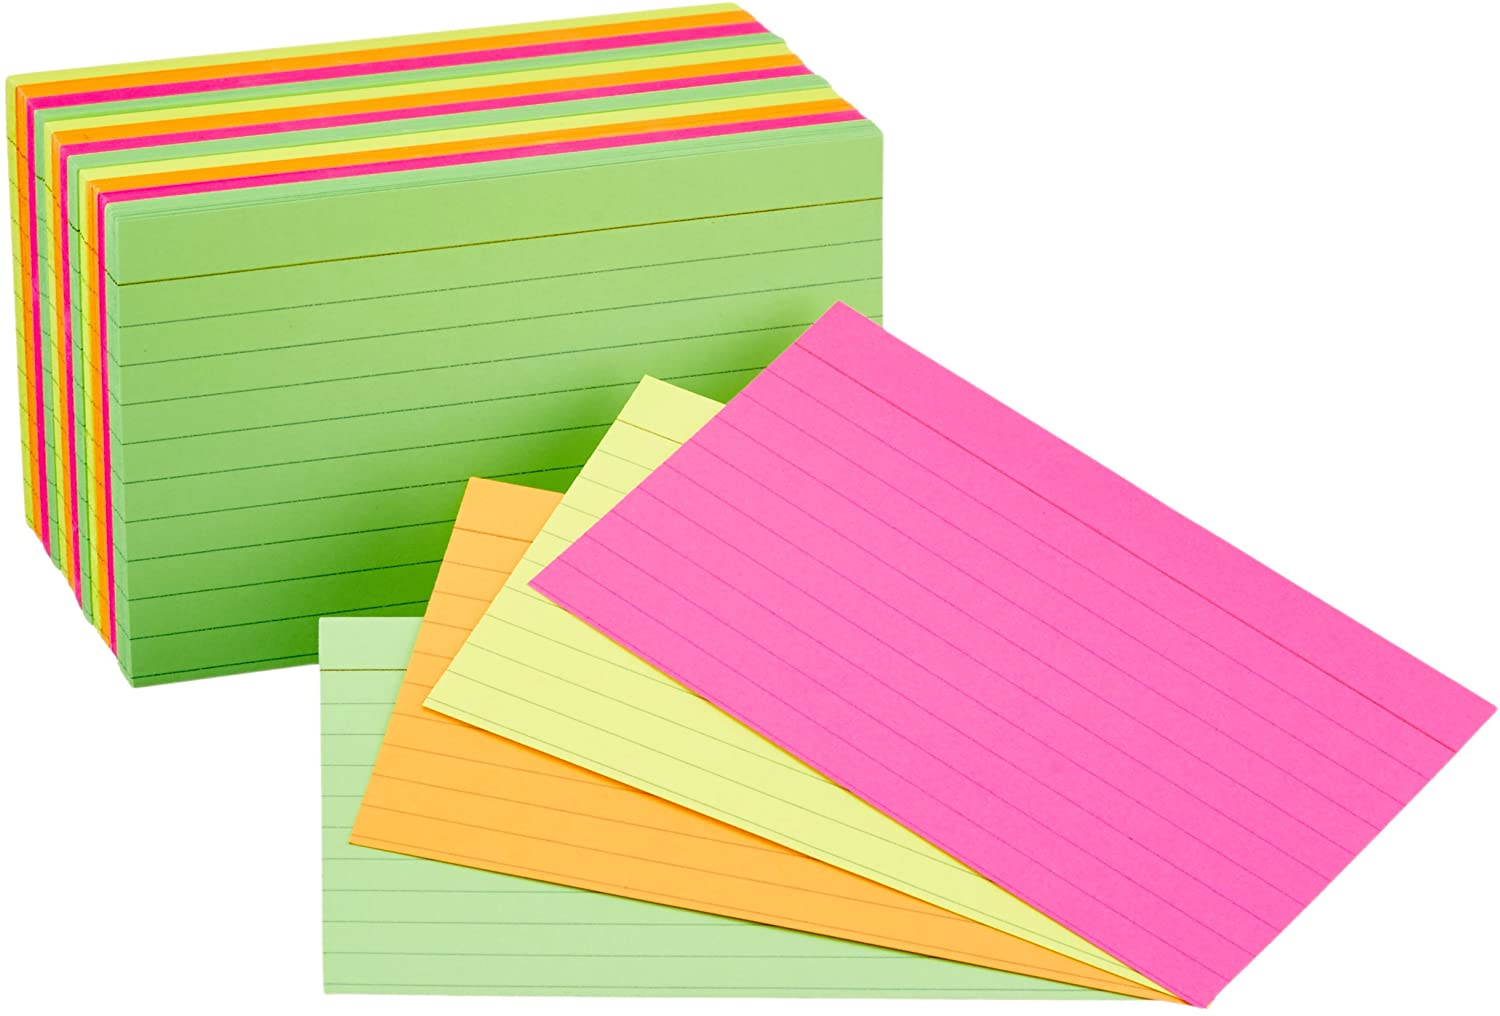 100 X REVISION RECORD INDEX FLASH CARDS WHITE LINED OR ASSORTED LINED. 3 SIZES 